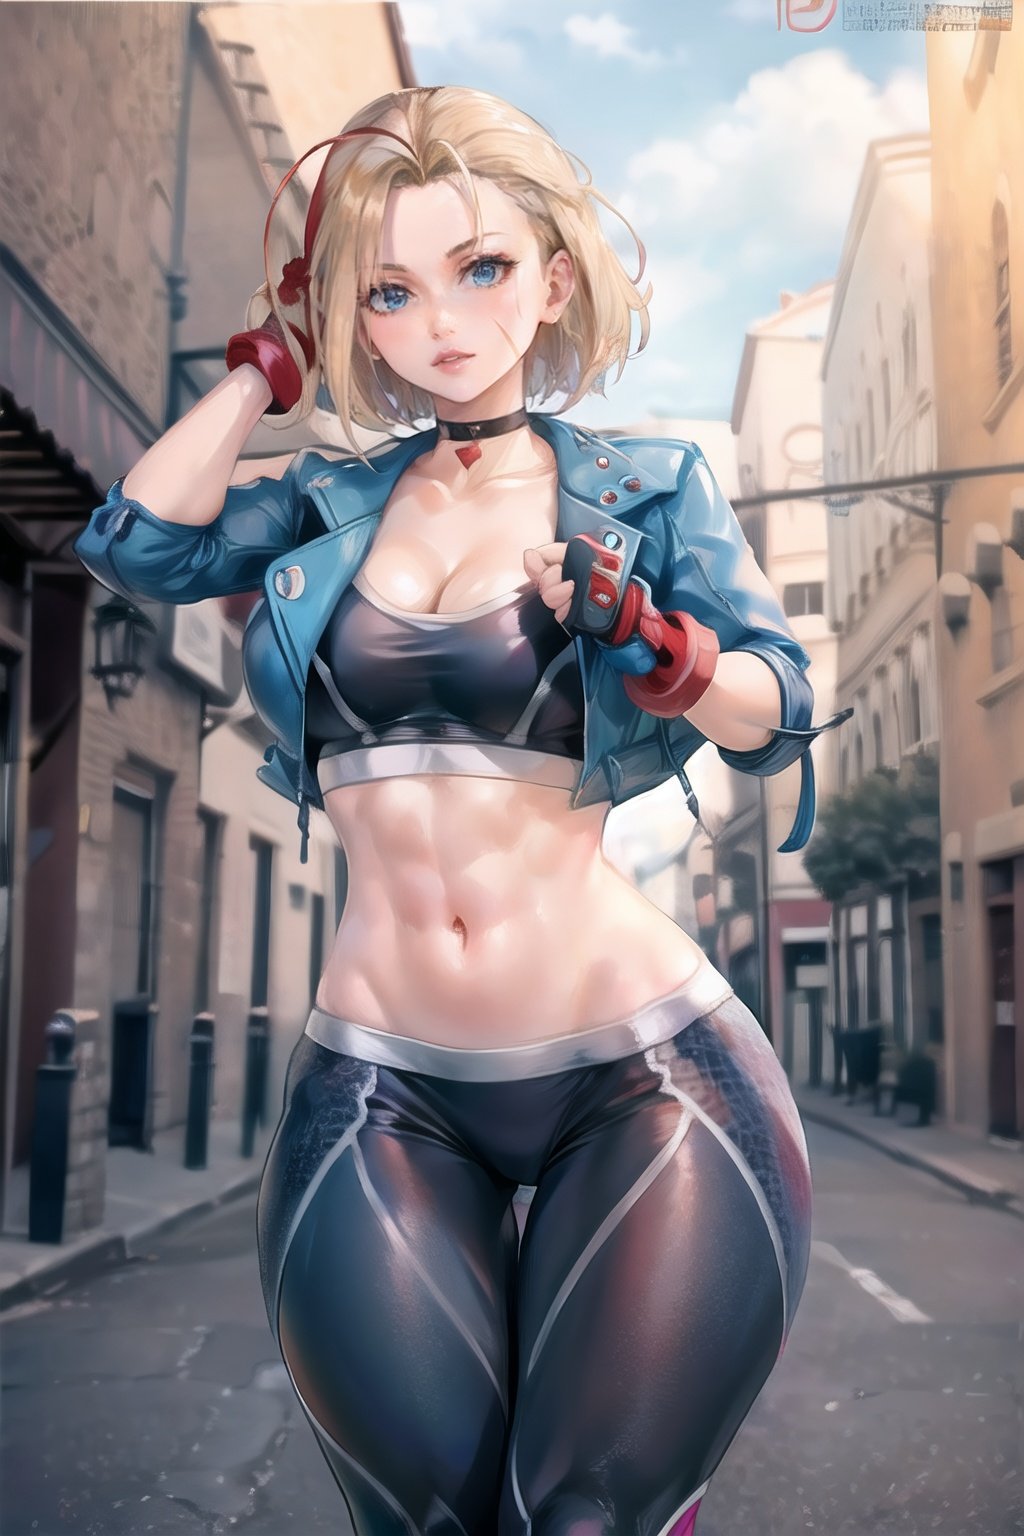 cammy_blue_jacket_aiwaifu,cammy white,cammy_blue_jacket_aiwaifu,short hair, blue eyes, gloves, jacket, fingerless gloves,blonde hair, cropped jacket,red gloves, choker, pants, jacket, navel, blue jacket, fingerless gloves, scar, scar on cheek, midriff,scar on face, sports bra, crop top, short hair,antenna hair, cleavage,open jacket, black pants, lips,yoga pants, toned, leather, makeup, black choker, tight pants,leather jacket, muscular, muscular female,blue jacket,union jack,tight, large breasts, cleavage, toned, collarbone,
masterpiece,best quality,ultra detailed, 8k, cinematic light,highly detailed, scenery,pose,solo,looking at viewer,